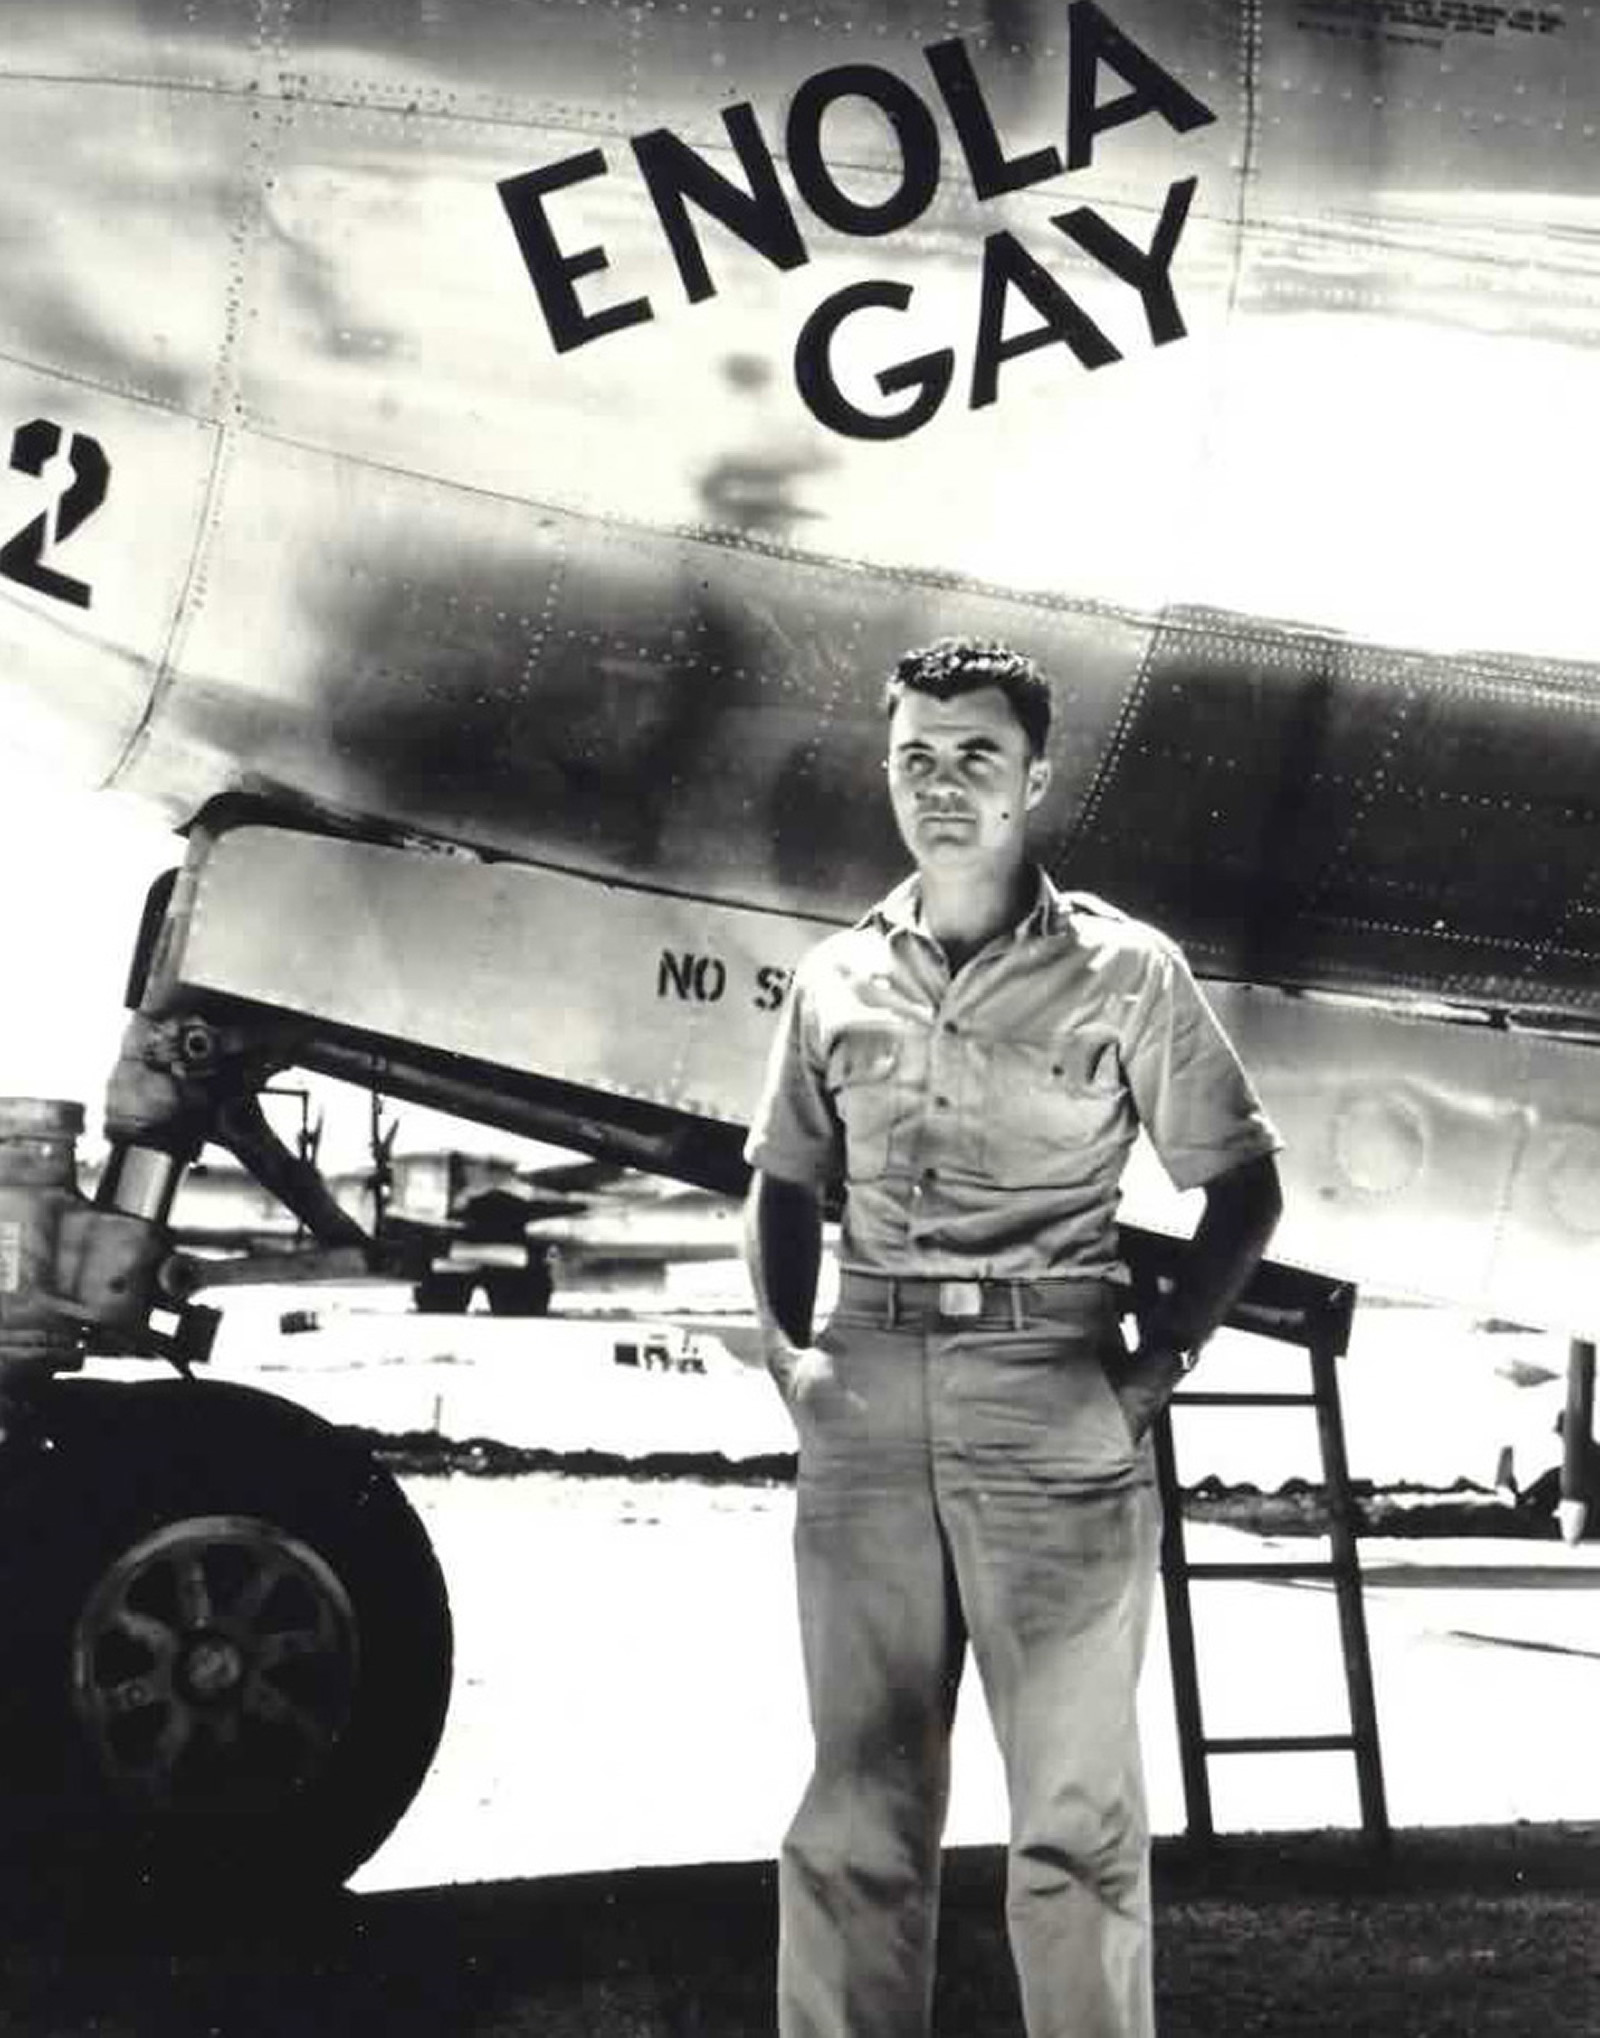 Colonel Paul Warfield Tibbets, Jr., United States Army Air Forces, Commanding Officer, 509th Composite group, and aircraft commander of the B-29 Superfortress, Enola Gay. (U.S. Air Force)